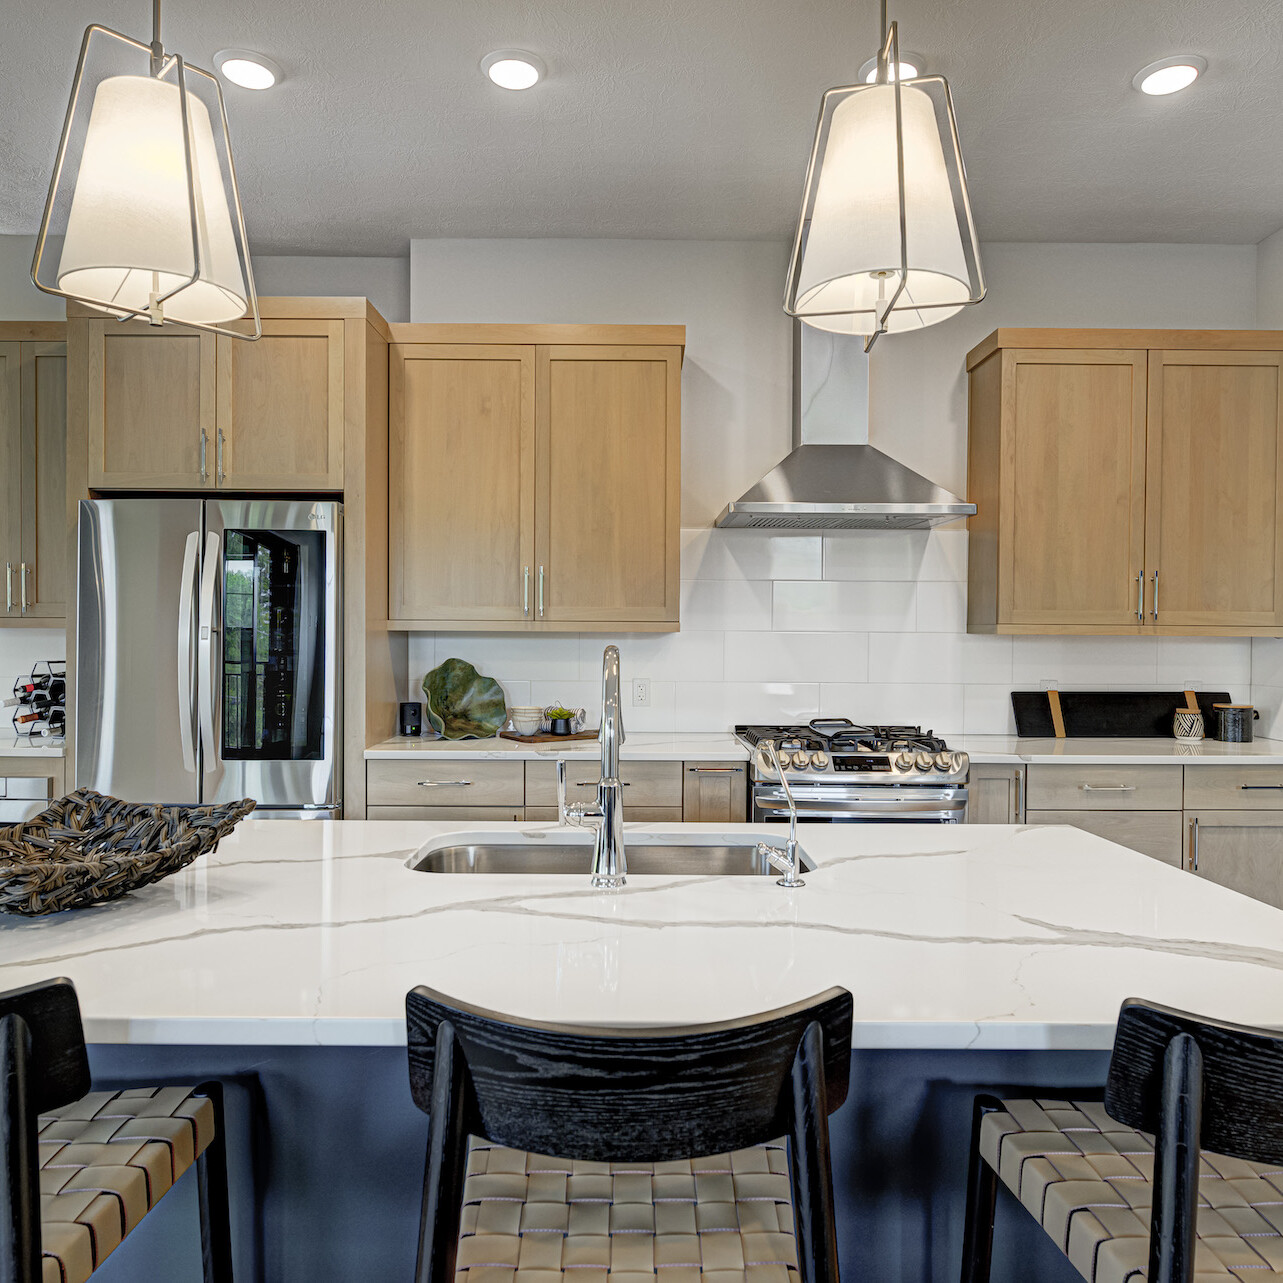 Indianapolis Custom Homes featuring a kitchen with a center island and stools.